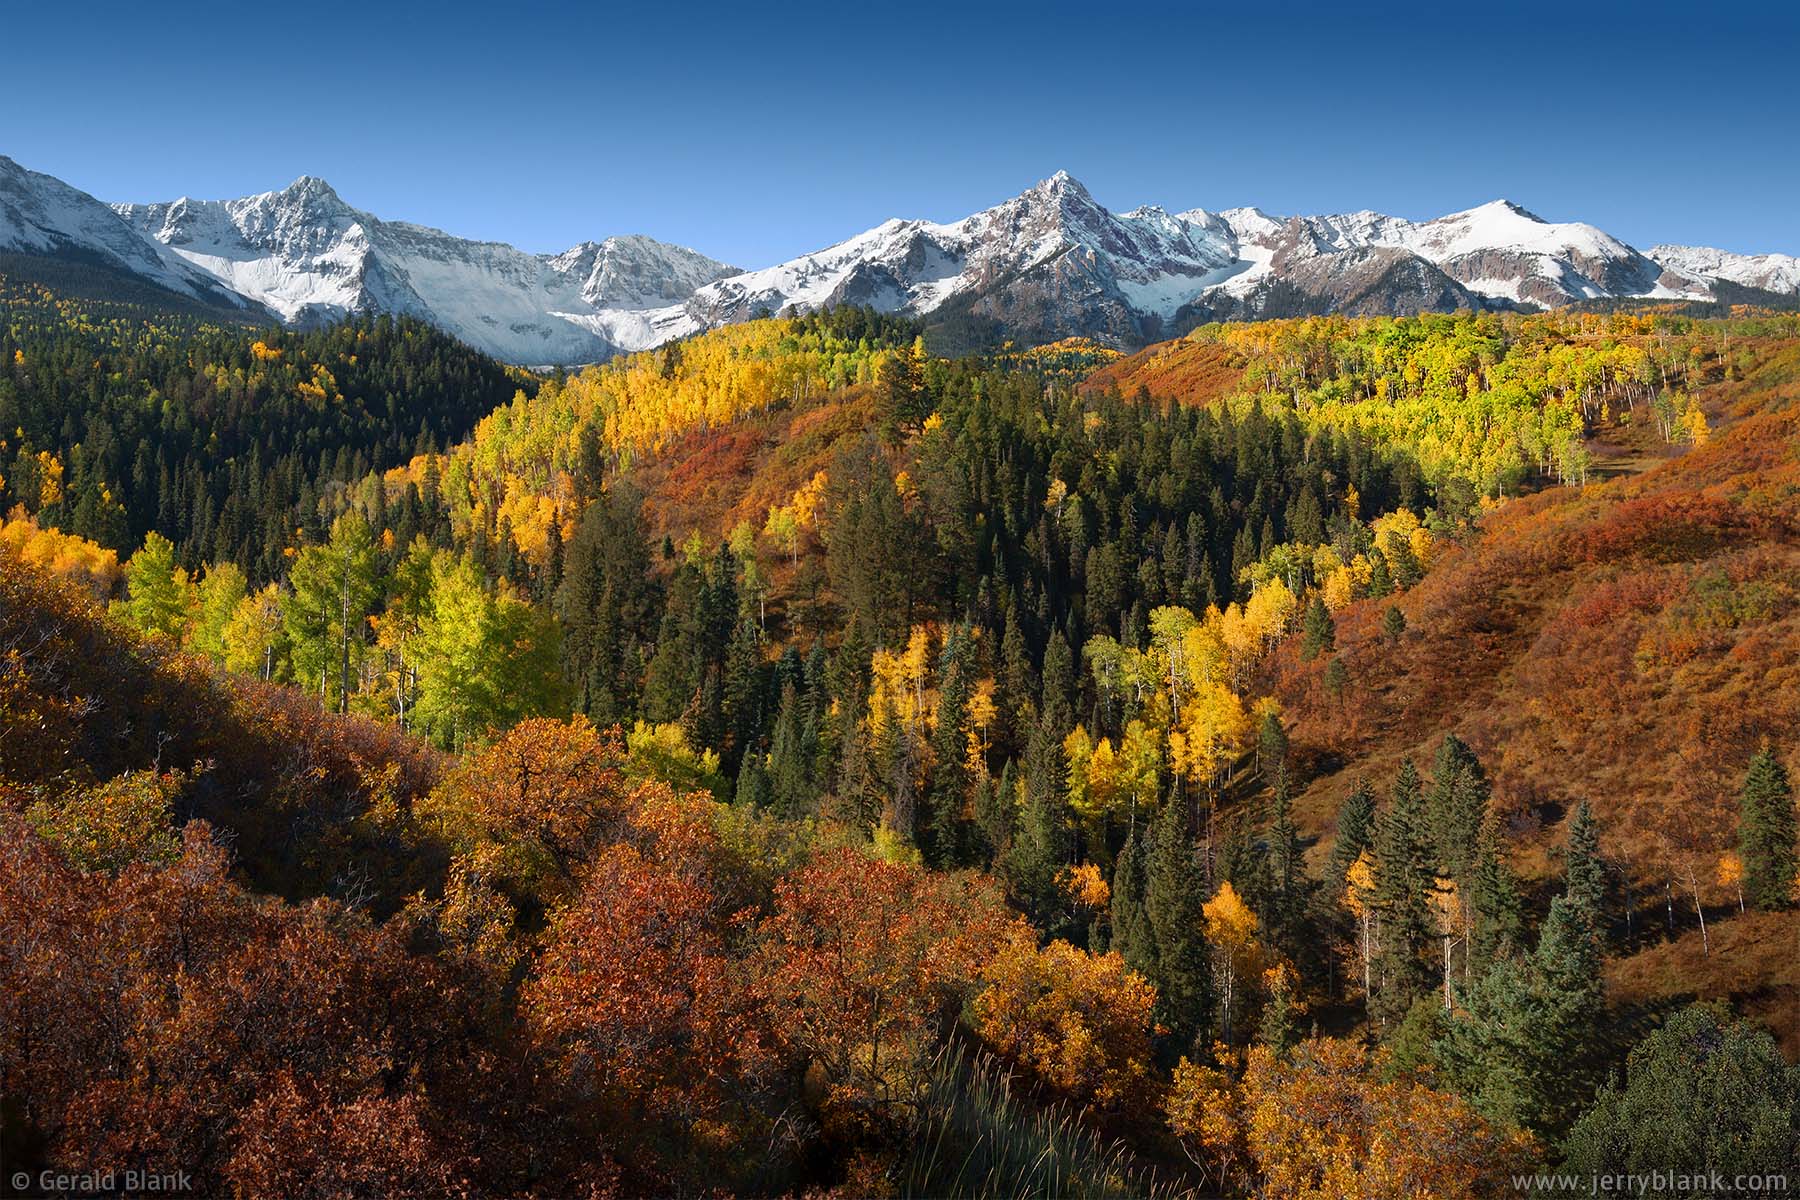 #06737 - Autumn colors near Mears Peak and Ruffner Mountain, San Juan Mountains, viewed from Ouray County Road 9 in Colorado - photo by Jerry Blank